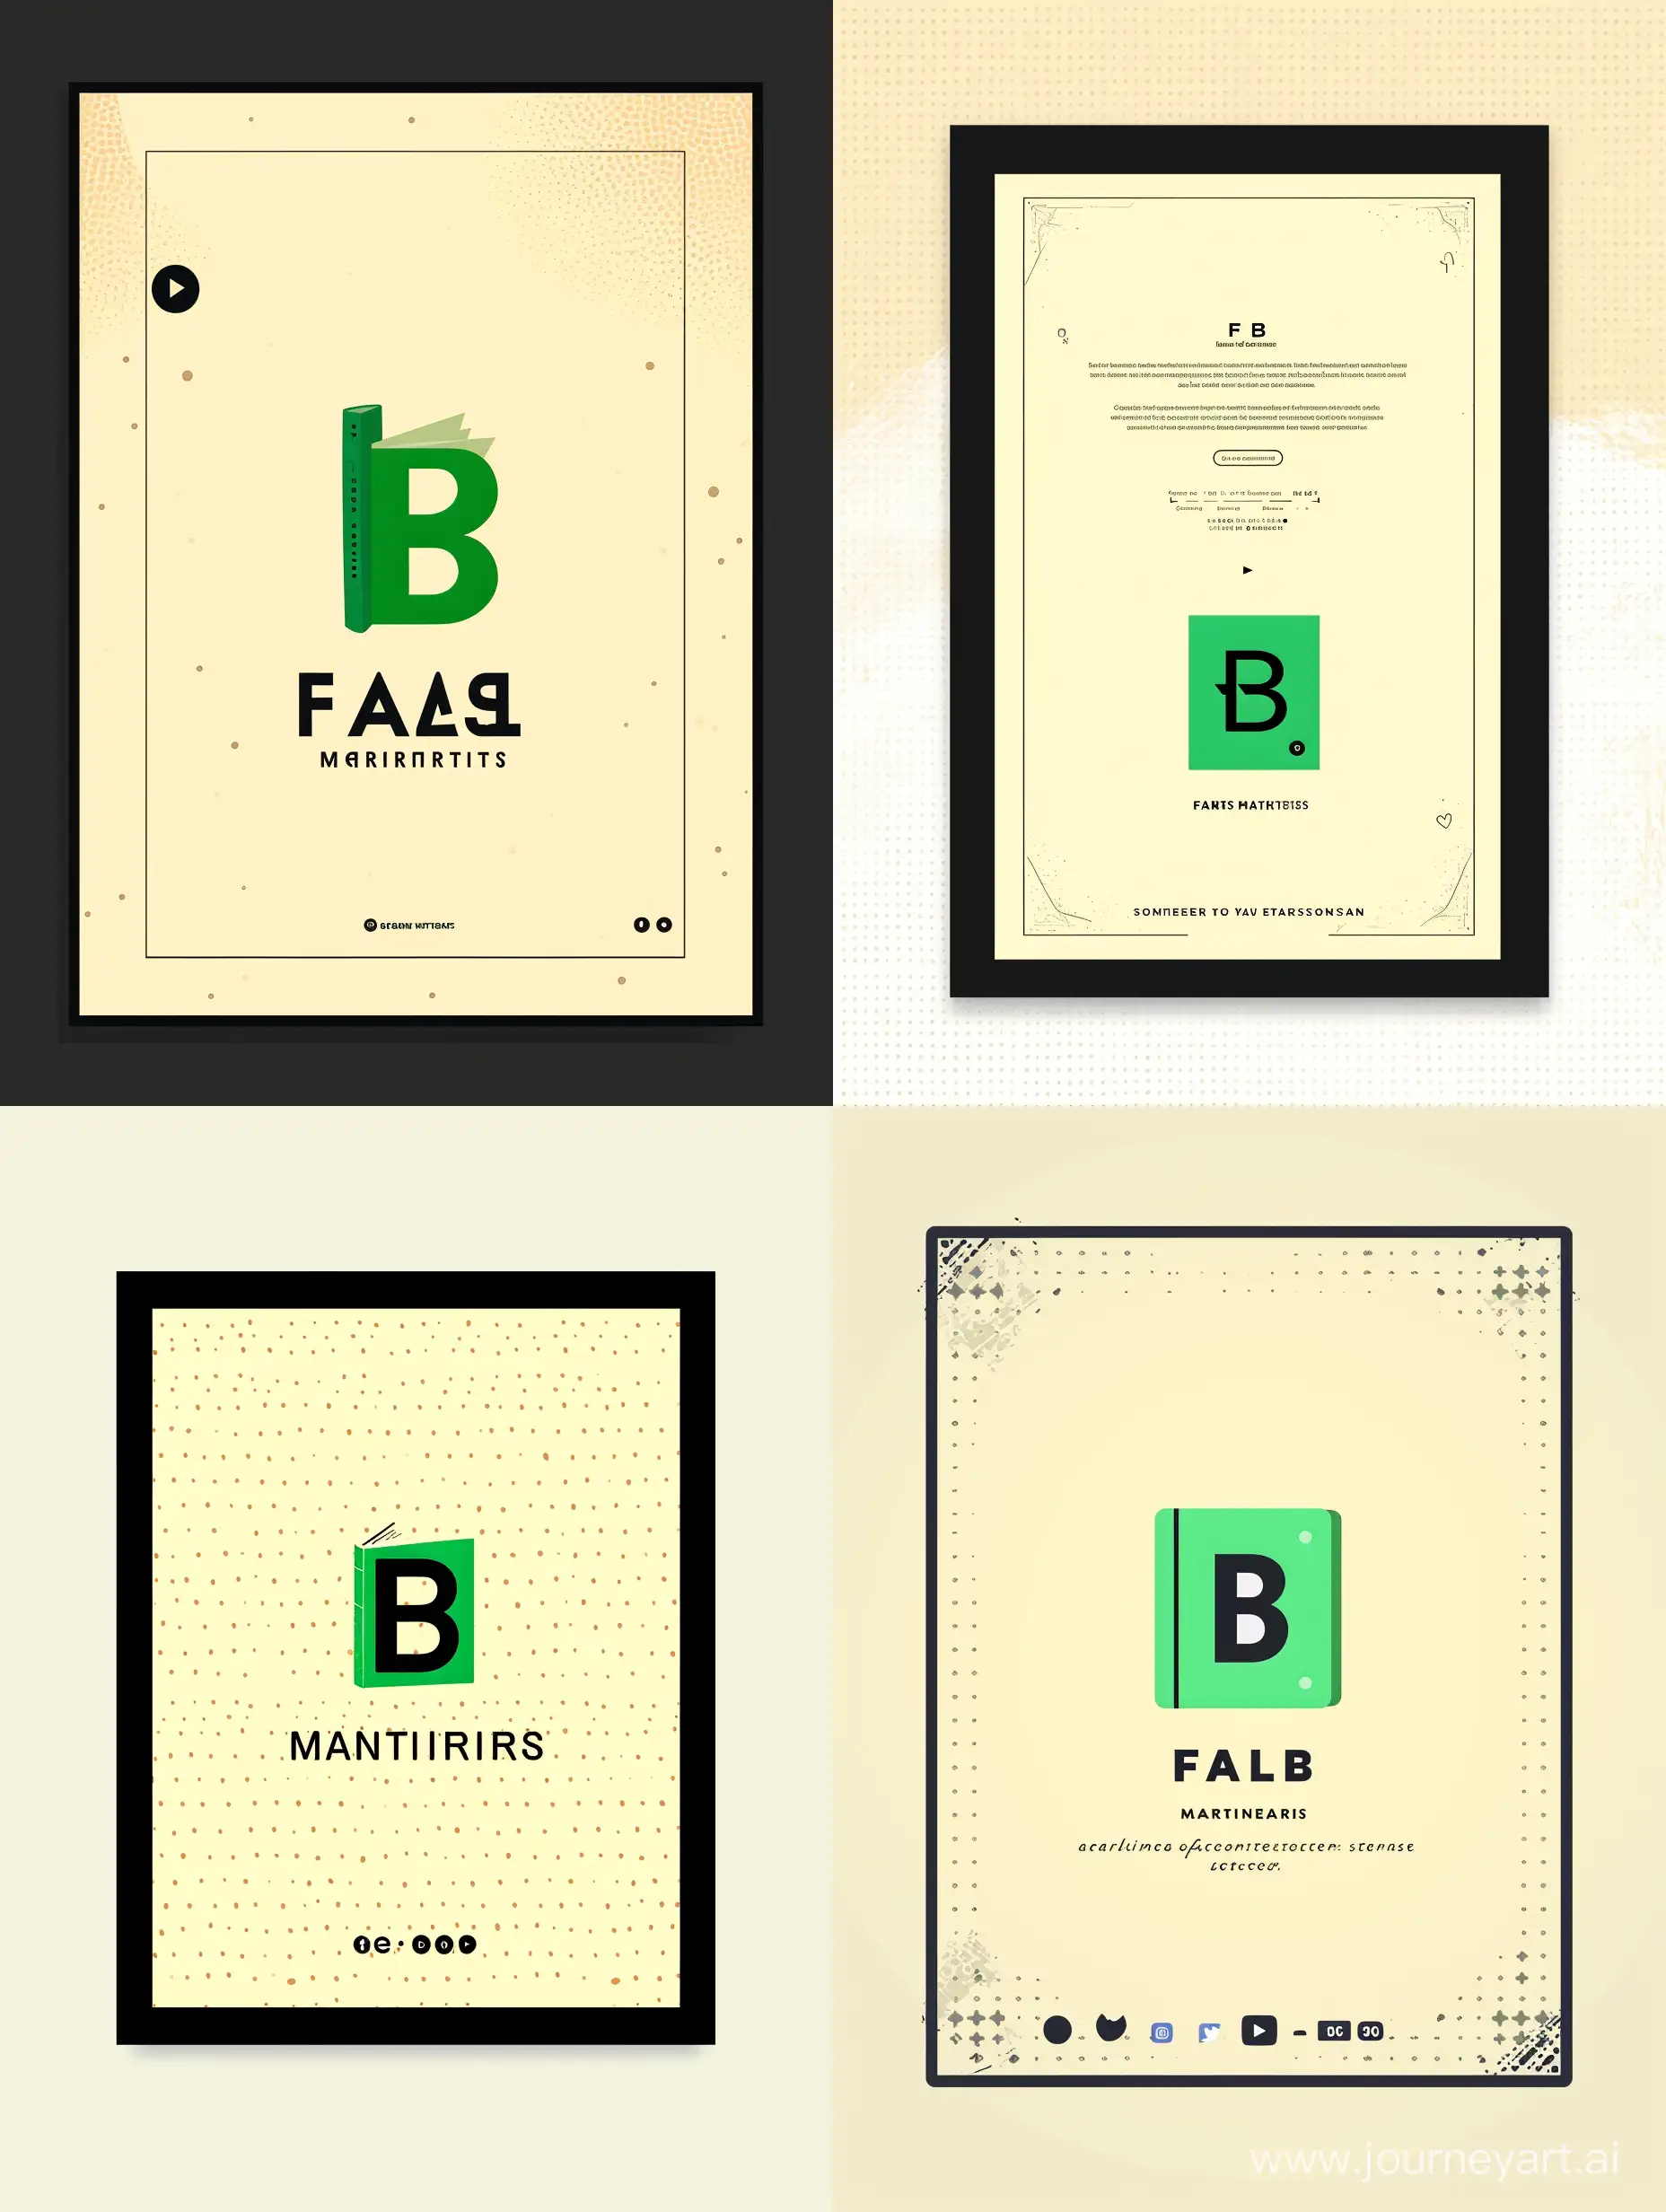 A minimalist and modern YouTube channel banner for Fable Matters. The background is a light yellow color with a dotted pattern that creates a subtle texture. The text is black and simple, using a sans-serif font that is easy to read. The letter B in Fable is a green book icon that represents storytelling and imagination. There is a black frame around the banner that adds contrast and elegance. There is also space for a profile picture on the left side and social media icons on the right side.